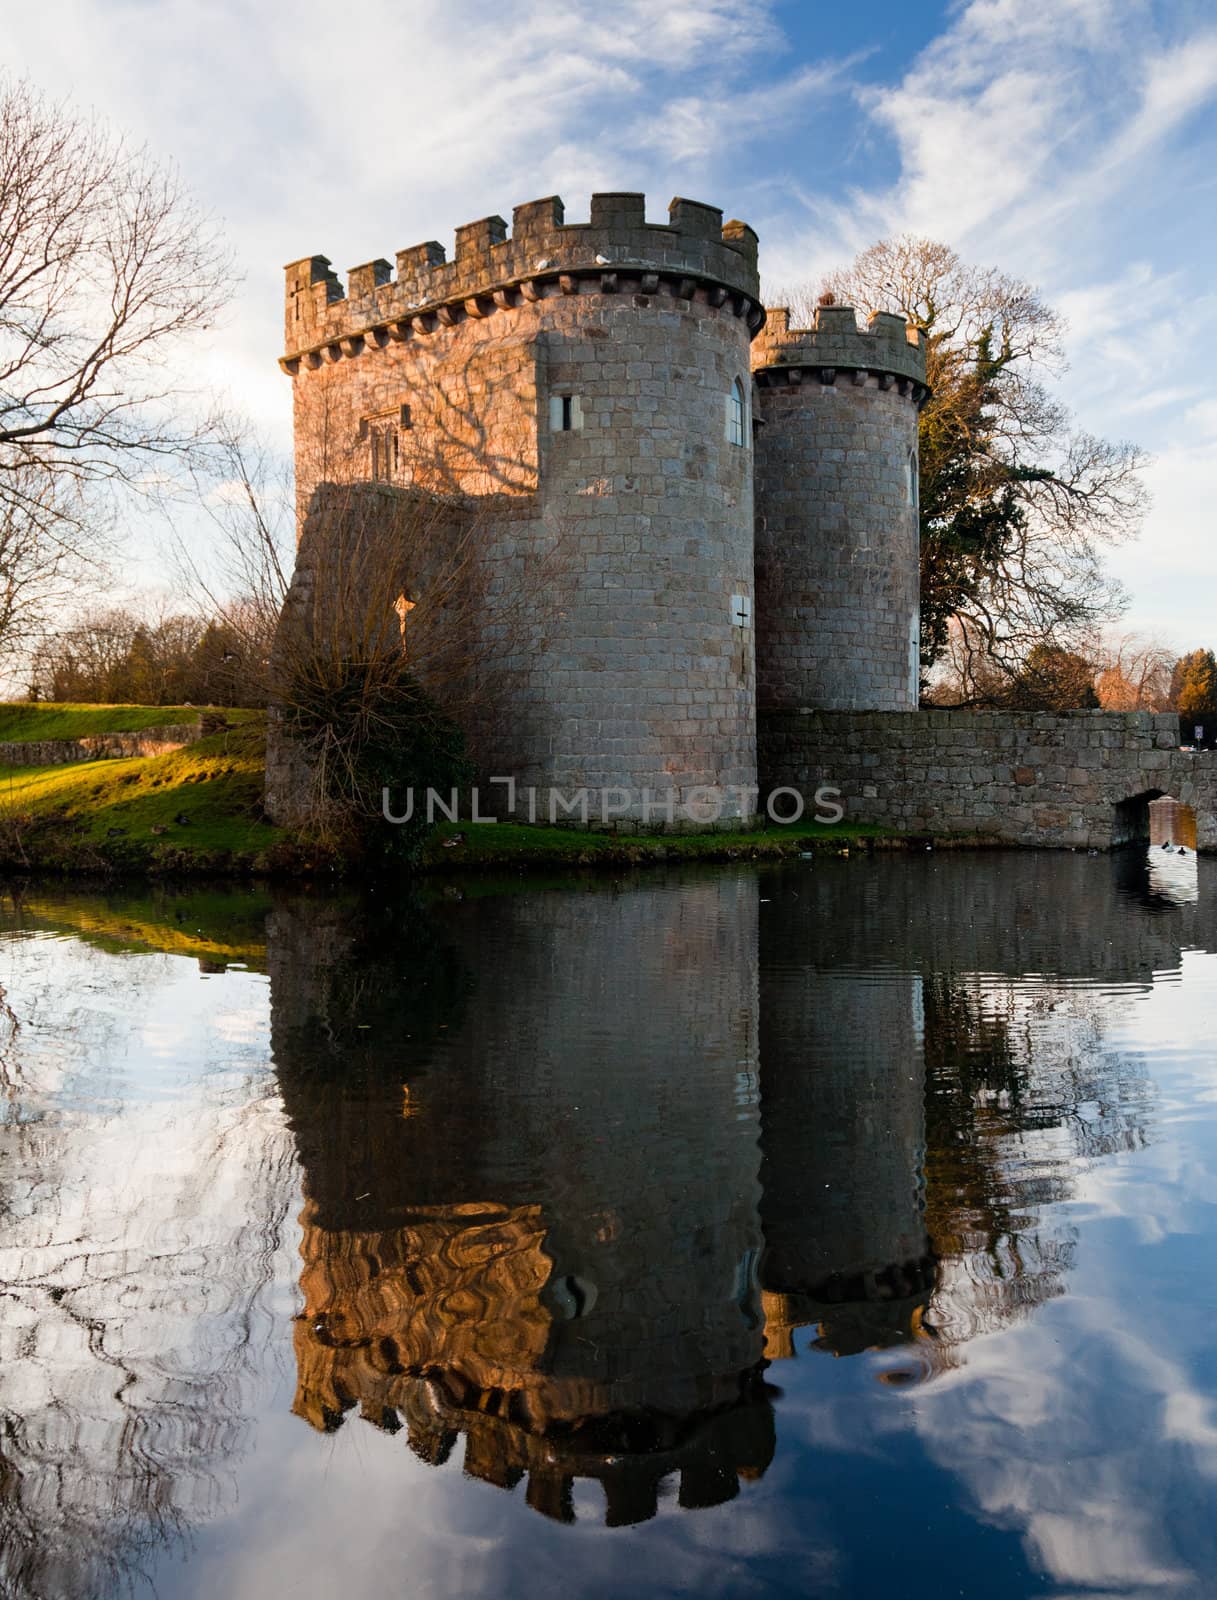 Whittington Castle in Shropshire reflecting on moat by steheap